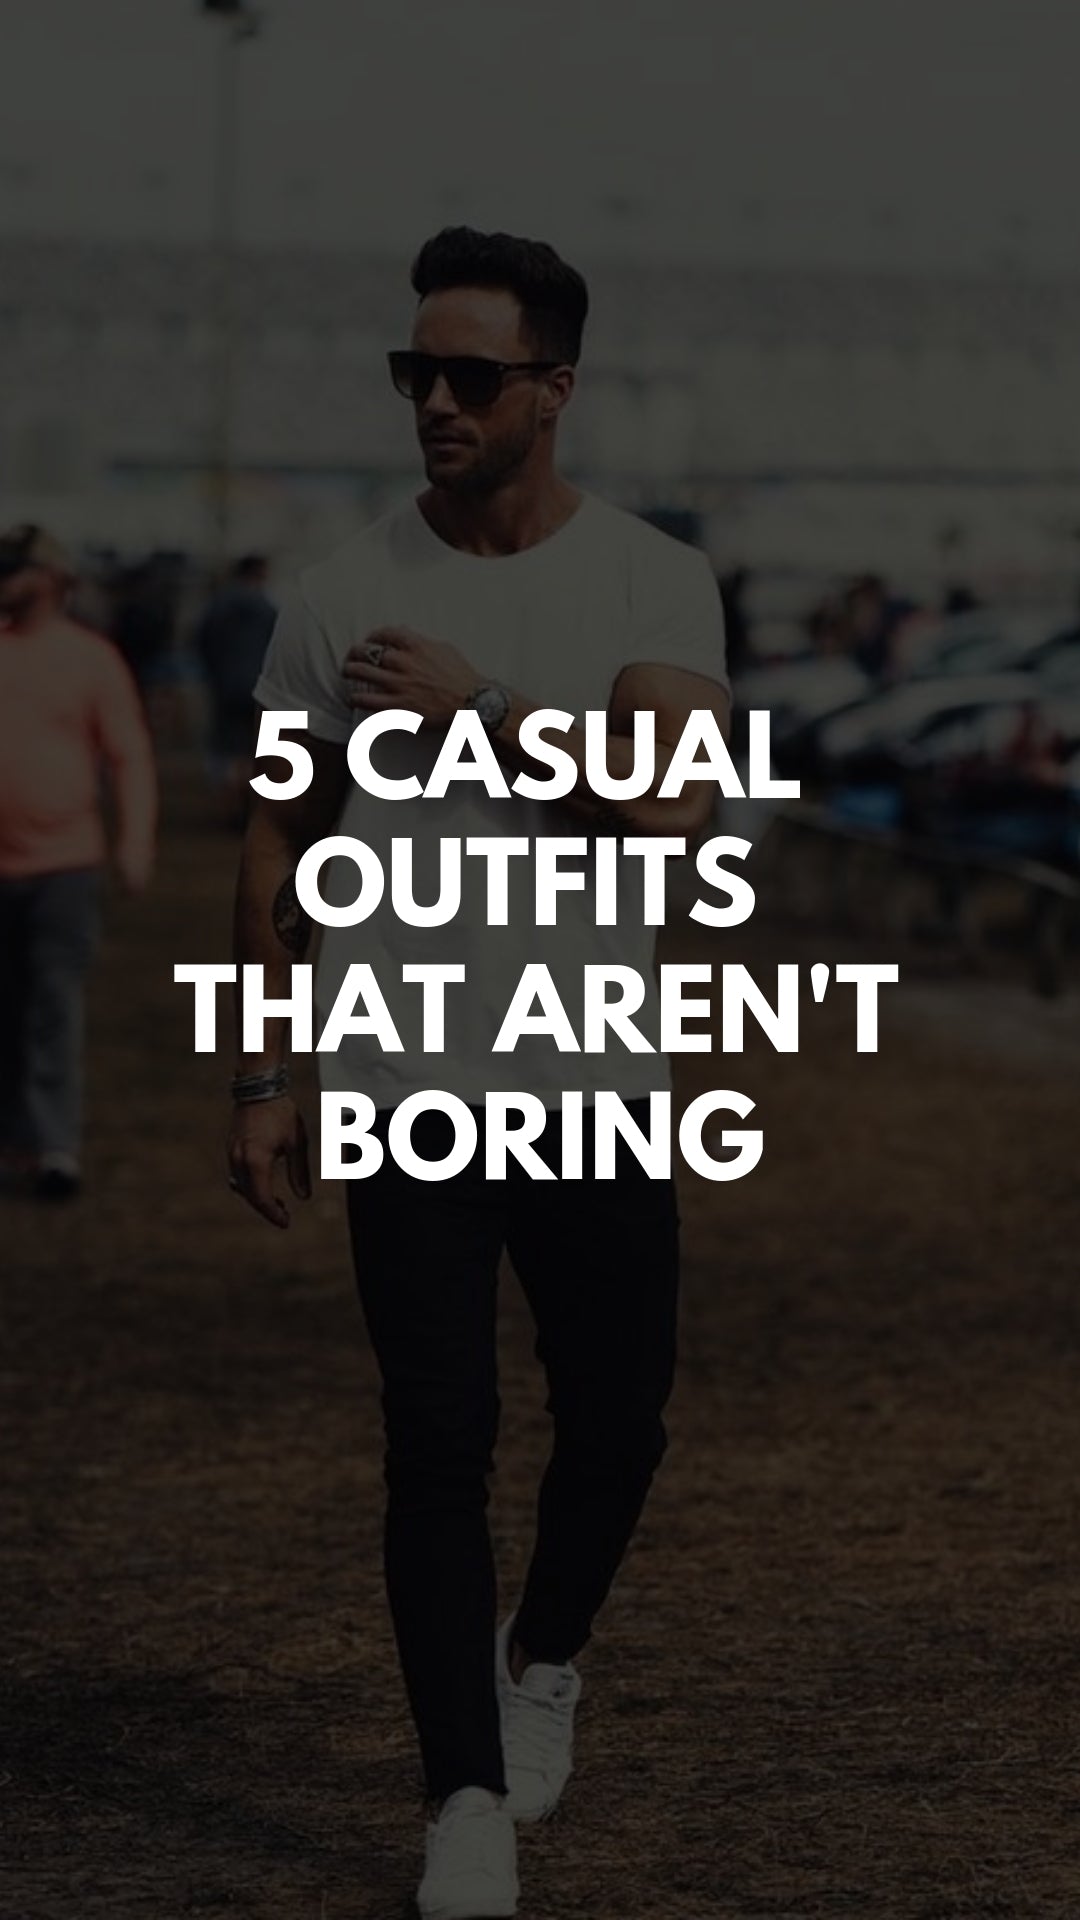 5 CASUAL OUTFITS THAT AREN'T BORING #casual #outfits #mensfashion